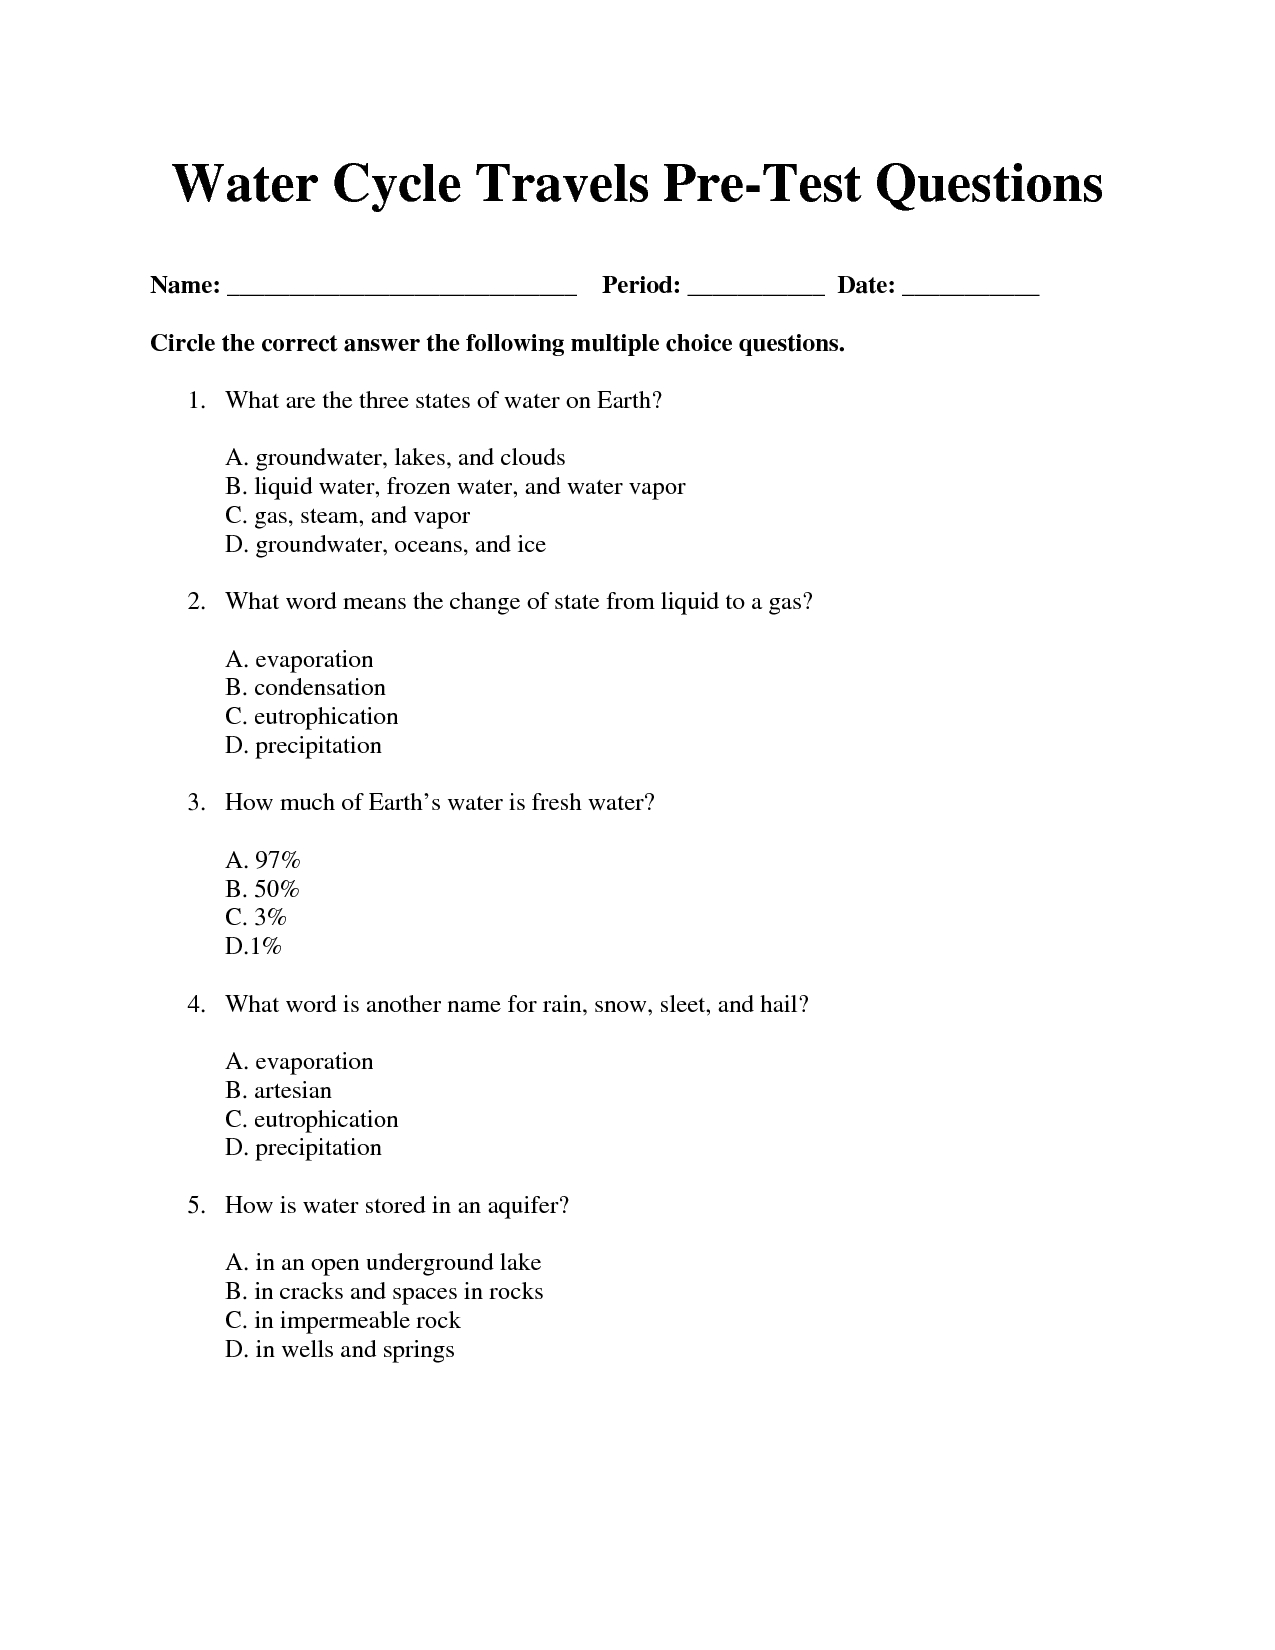 Water Cycle Multiple Choice Pre-Test Questions | Water Cycle - Free Printable Versatiles Worksheets